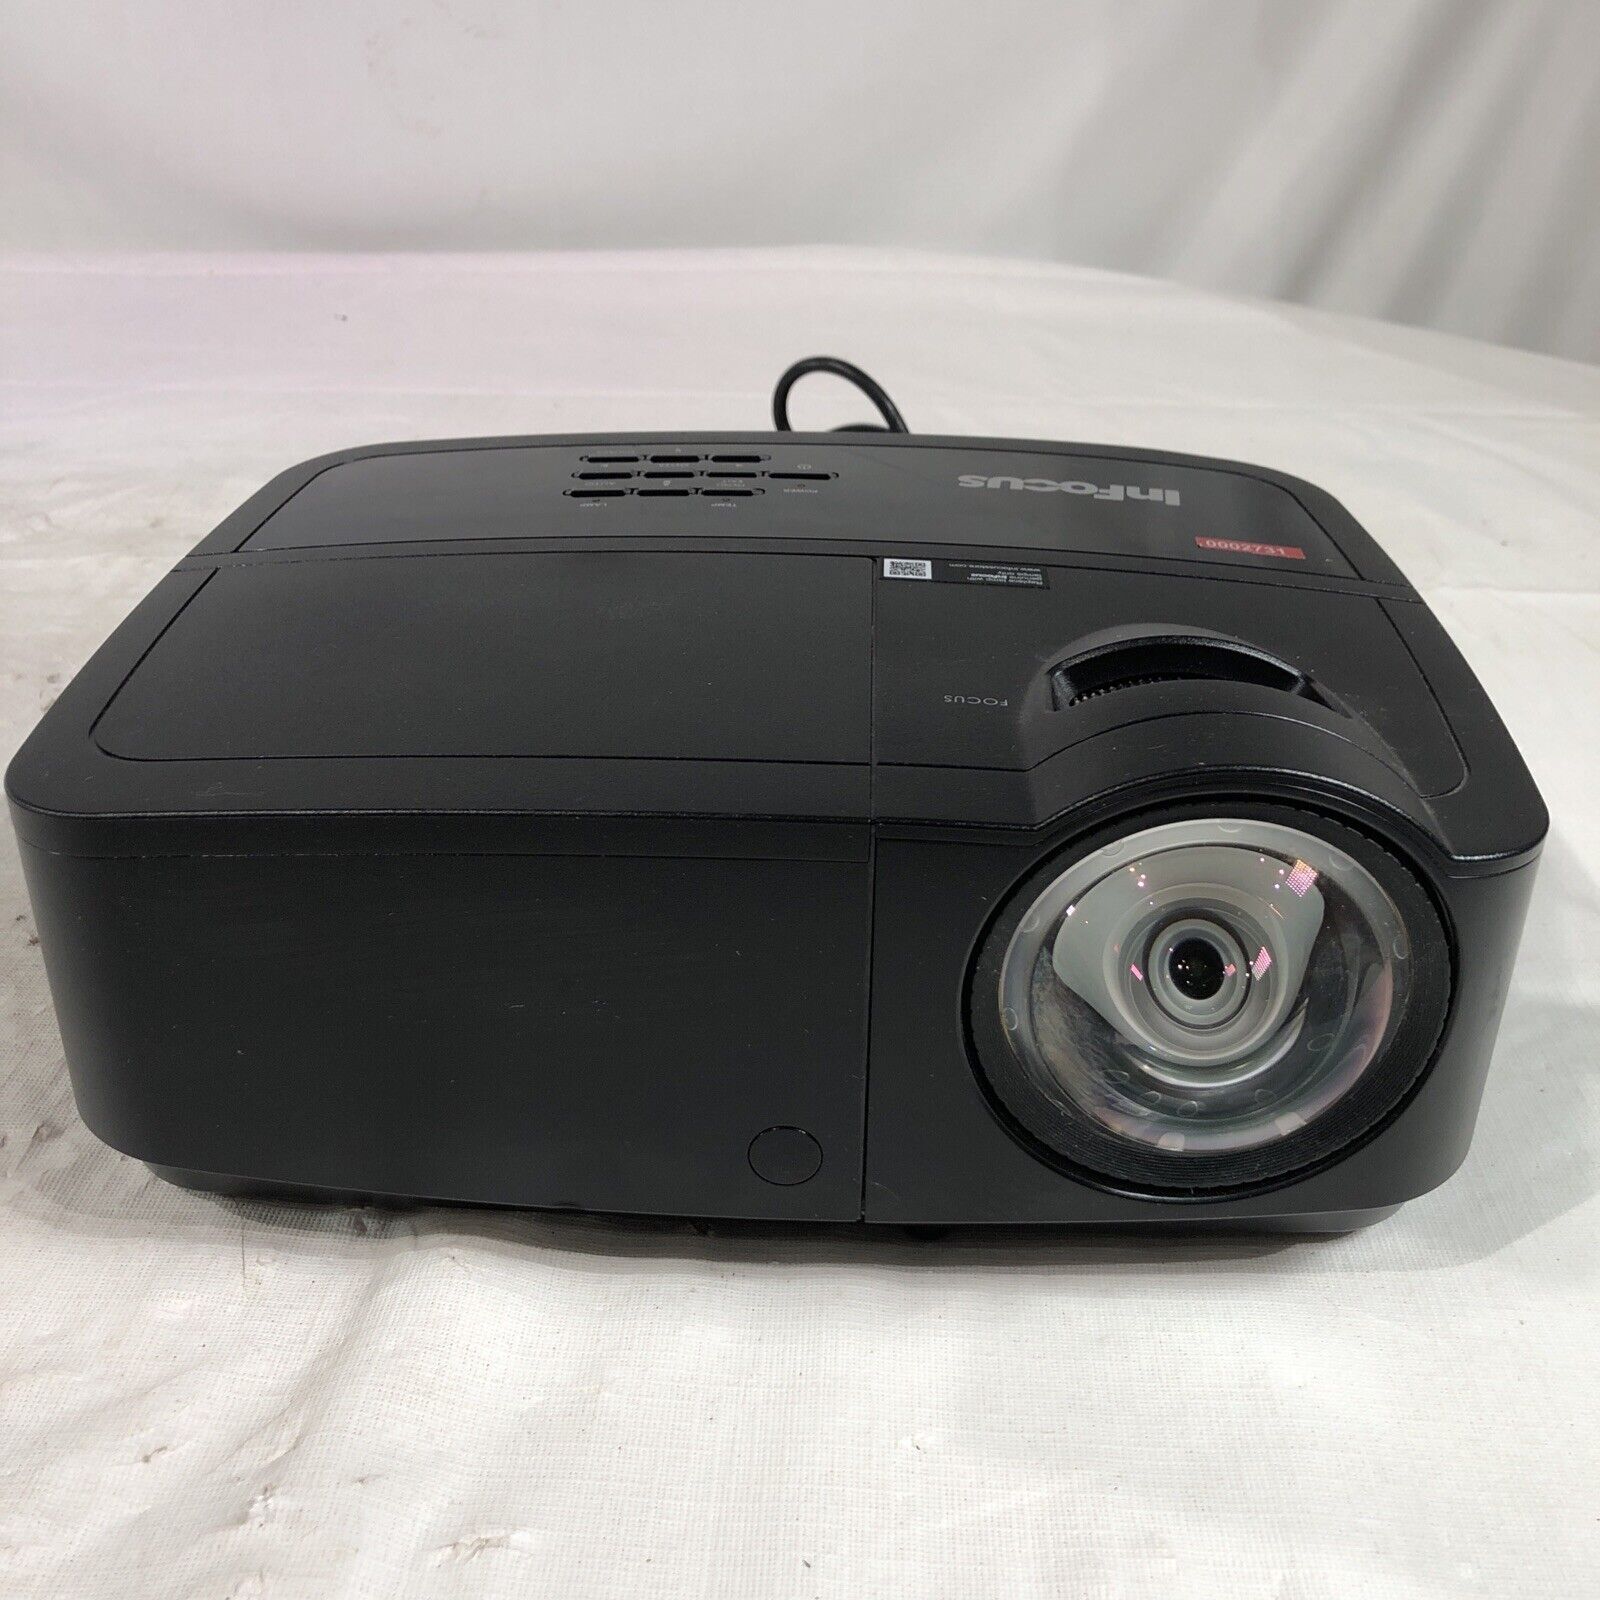 InFocus IN124STx Home Video Projector - HDMI- Tested, Works